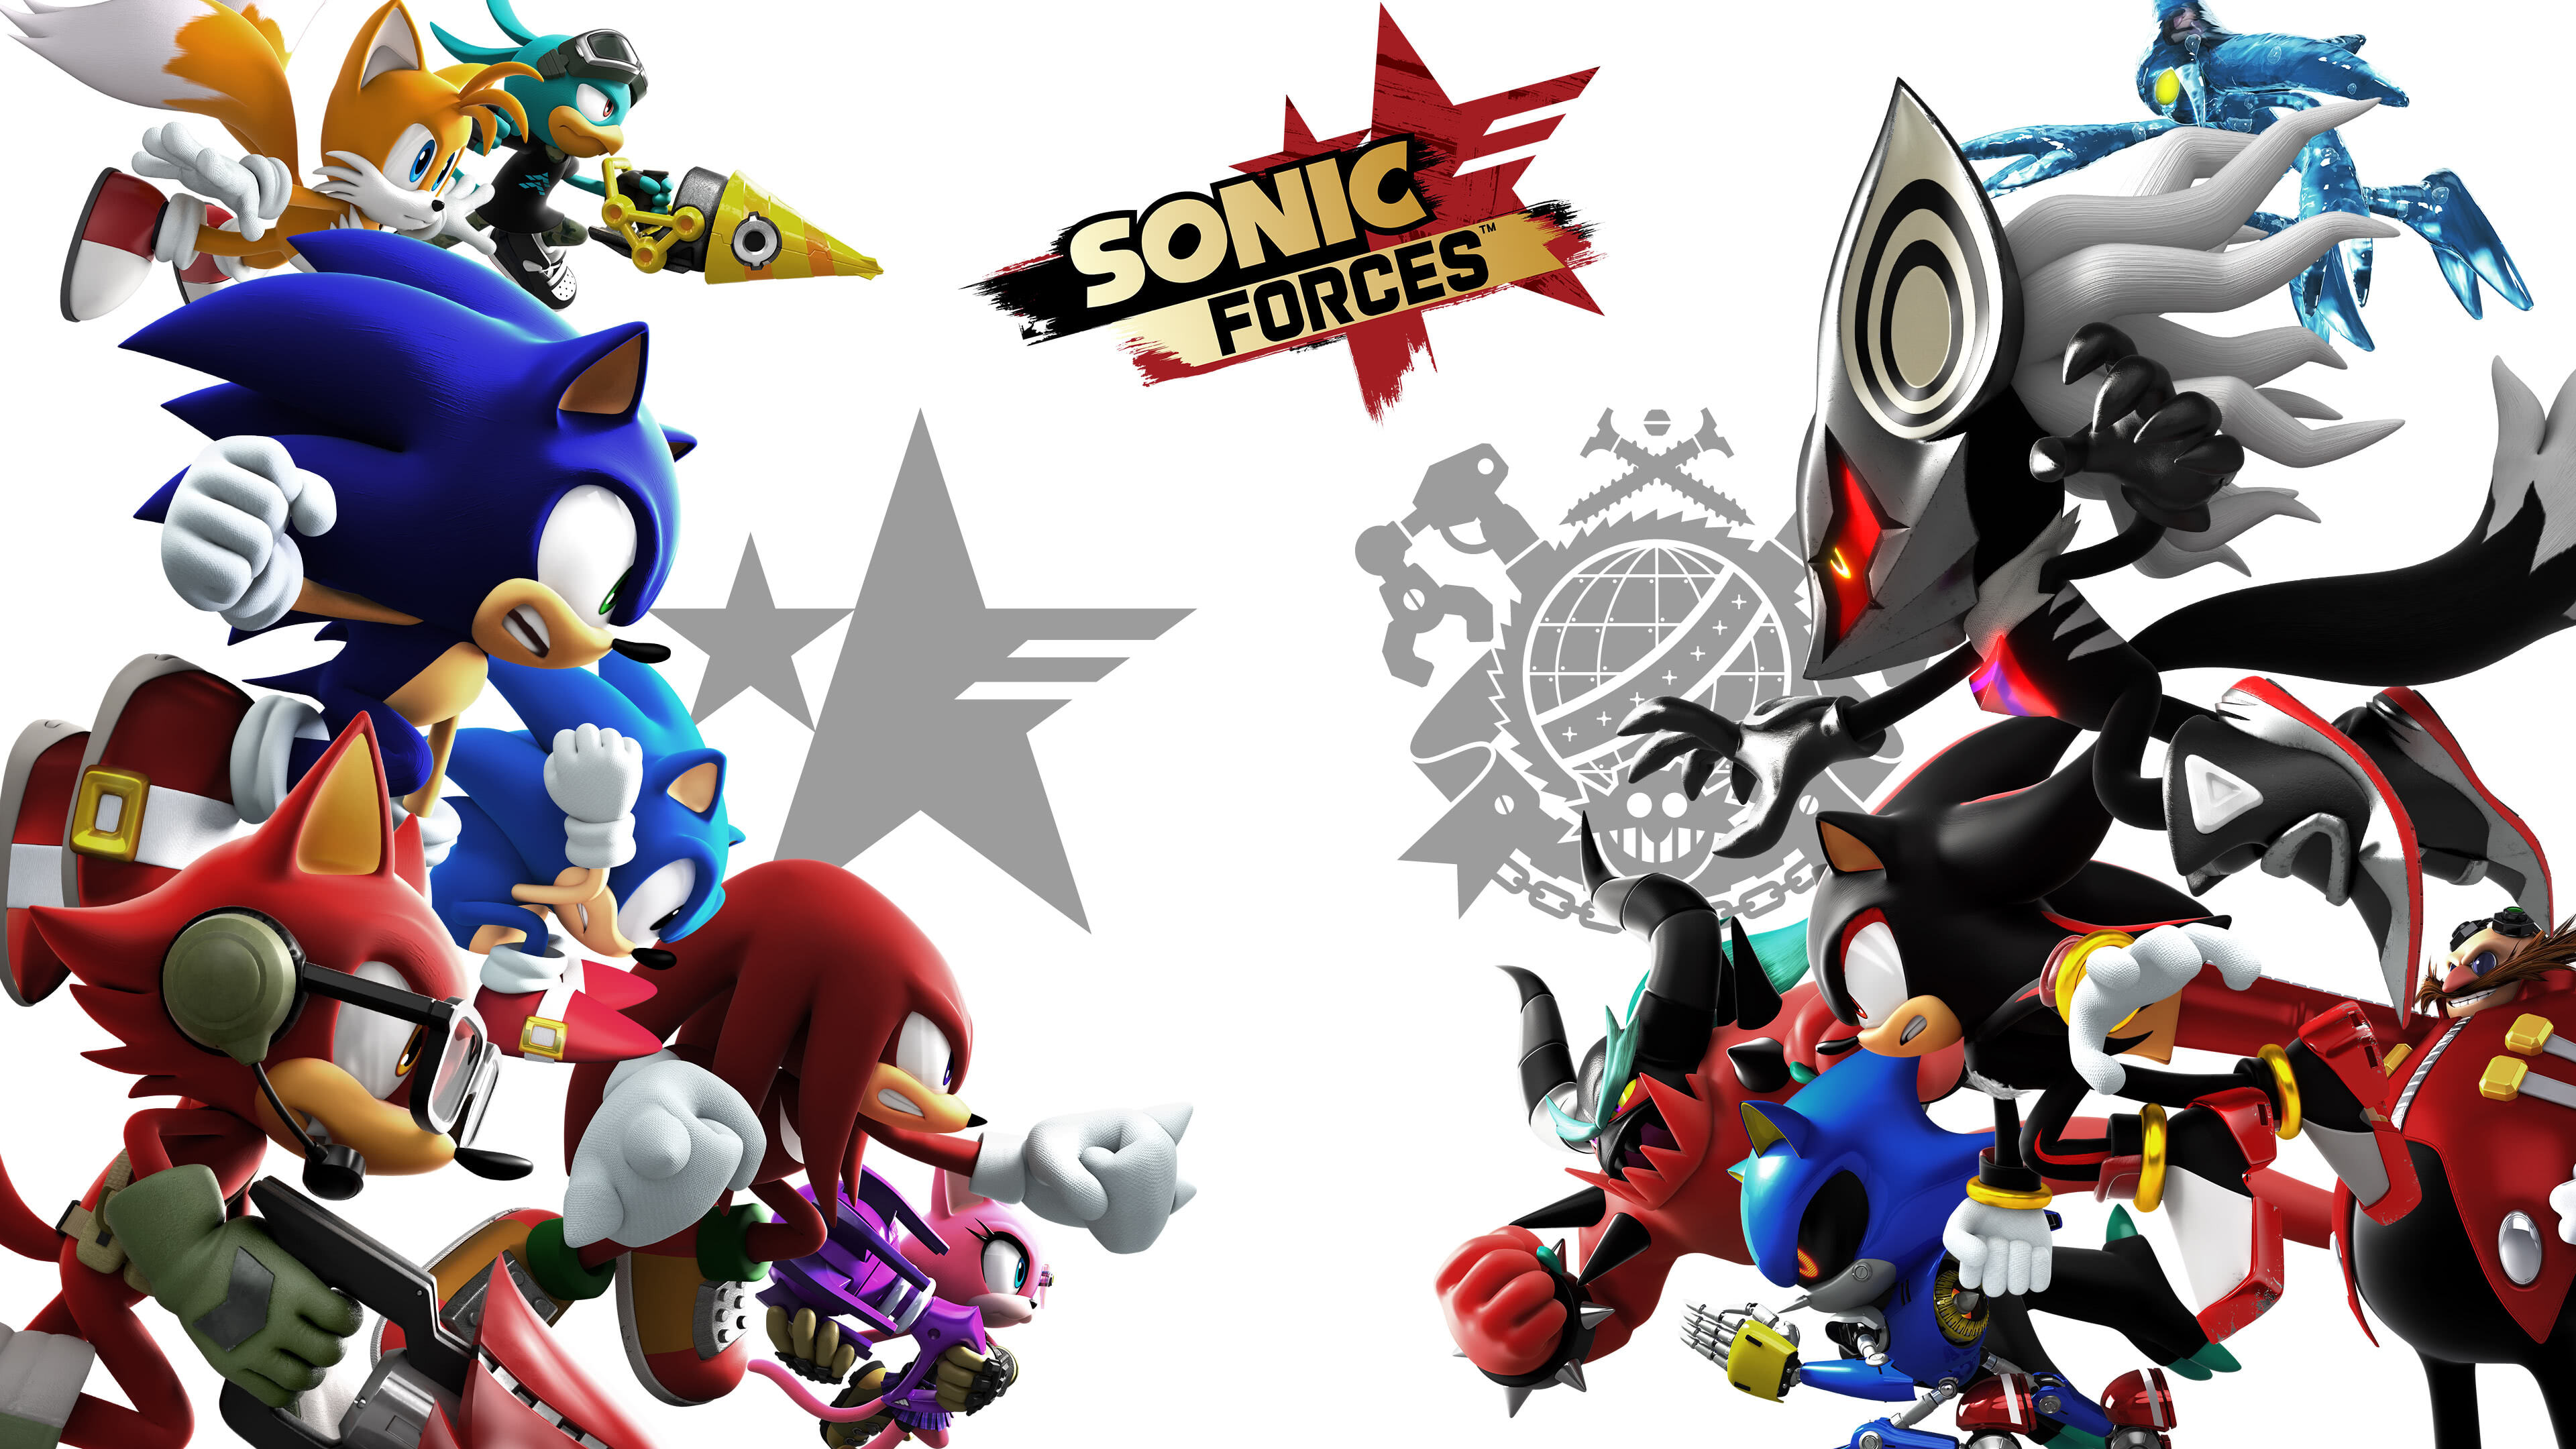 sonic characters wallpaper,fictional character,hero,transformers,games,sonic the hedgehog